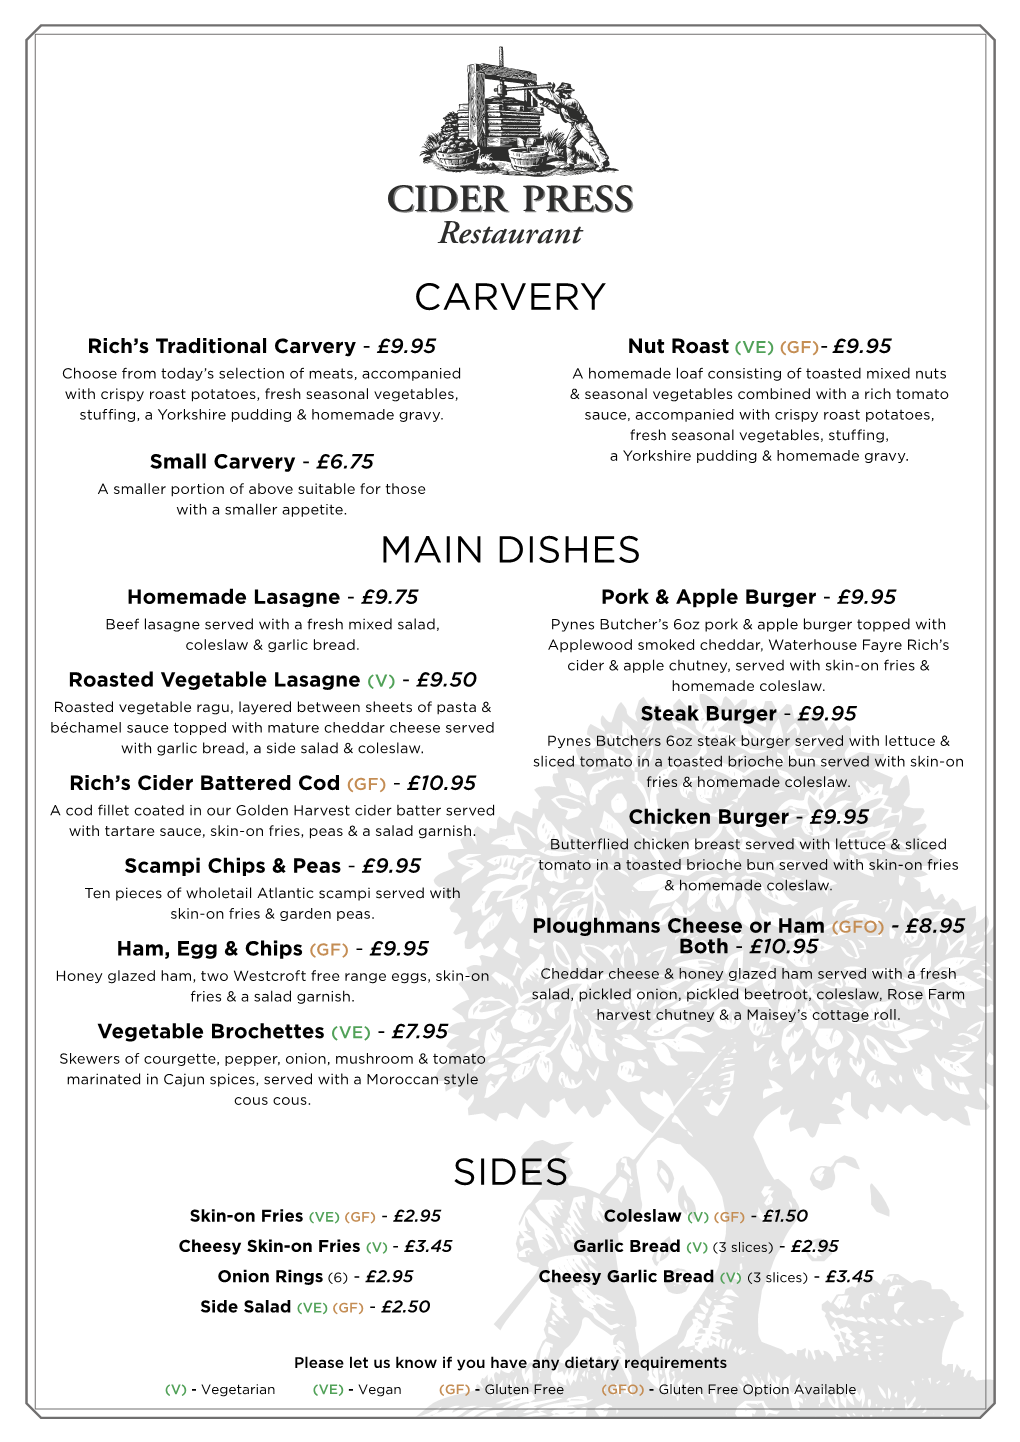 Carvery Main Dishes Sides